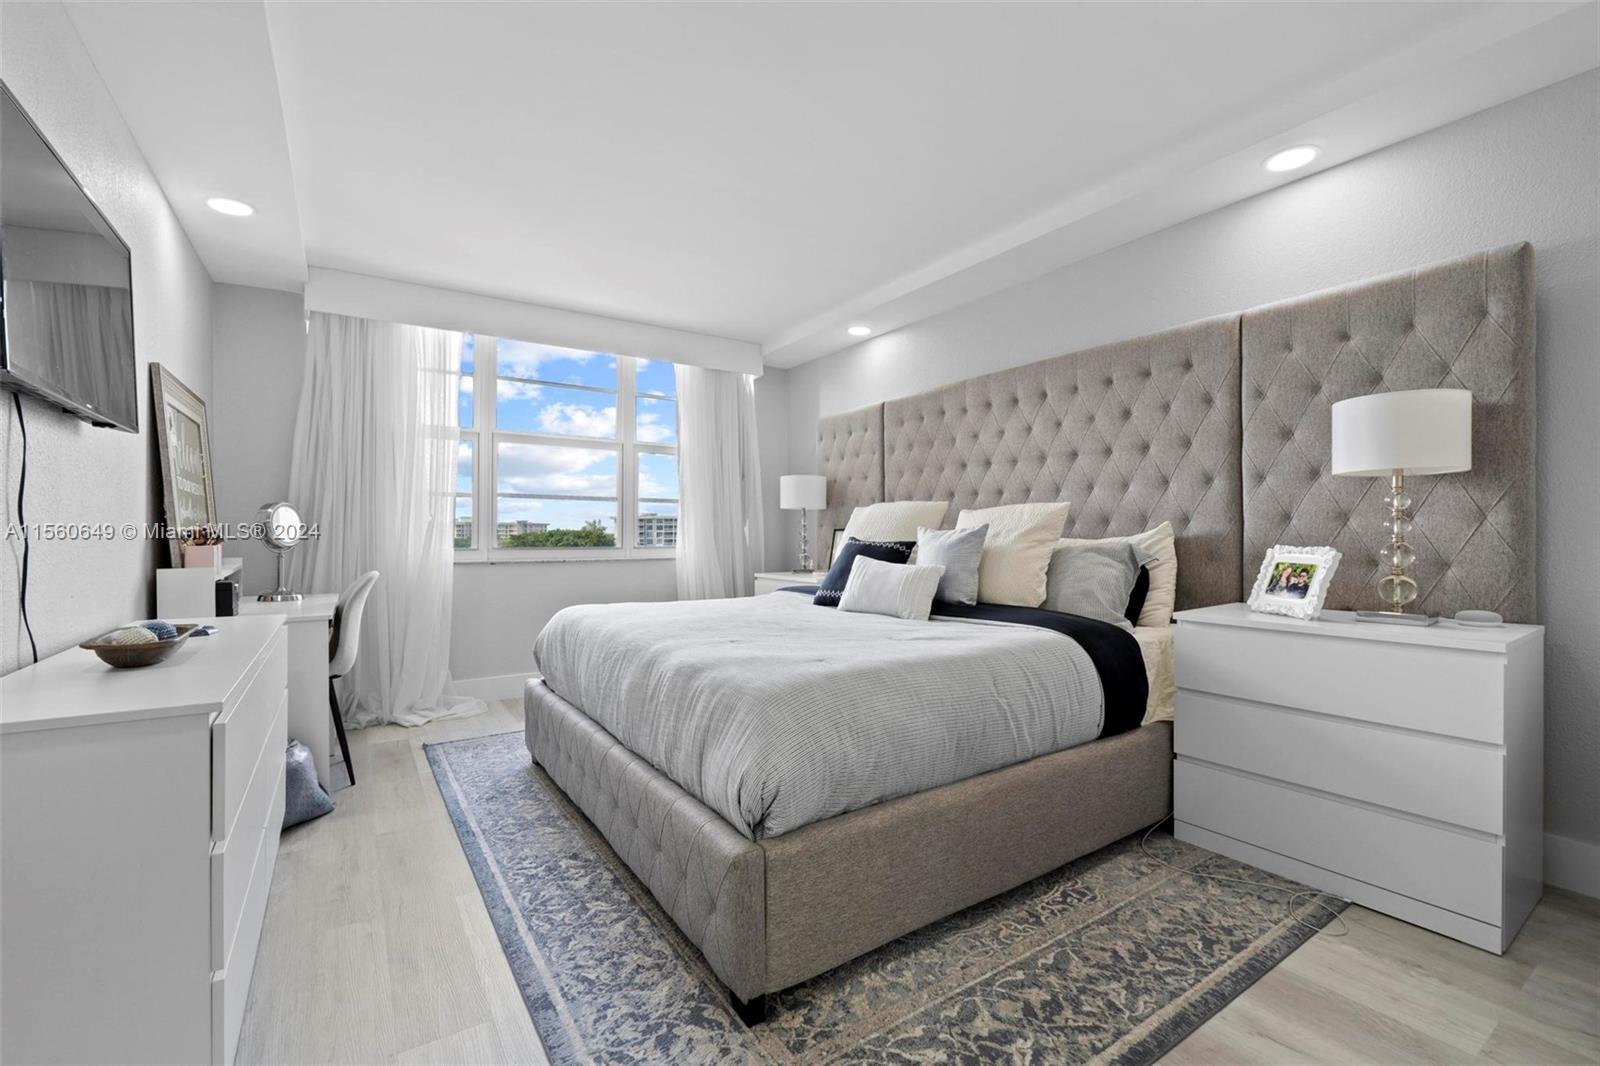 Experience modern luxury in this stunning 3-bed, 2.5-bath condo boasting a new open concept design. 